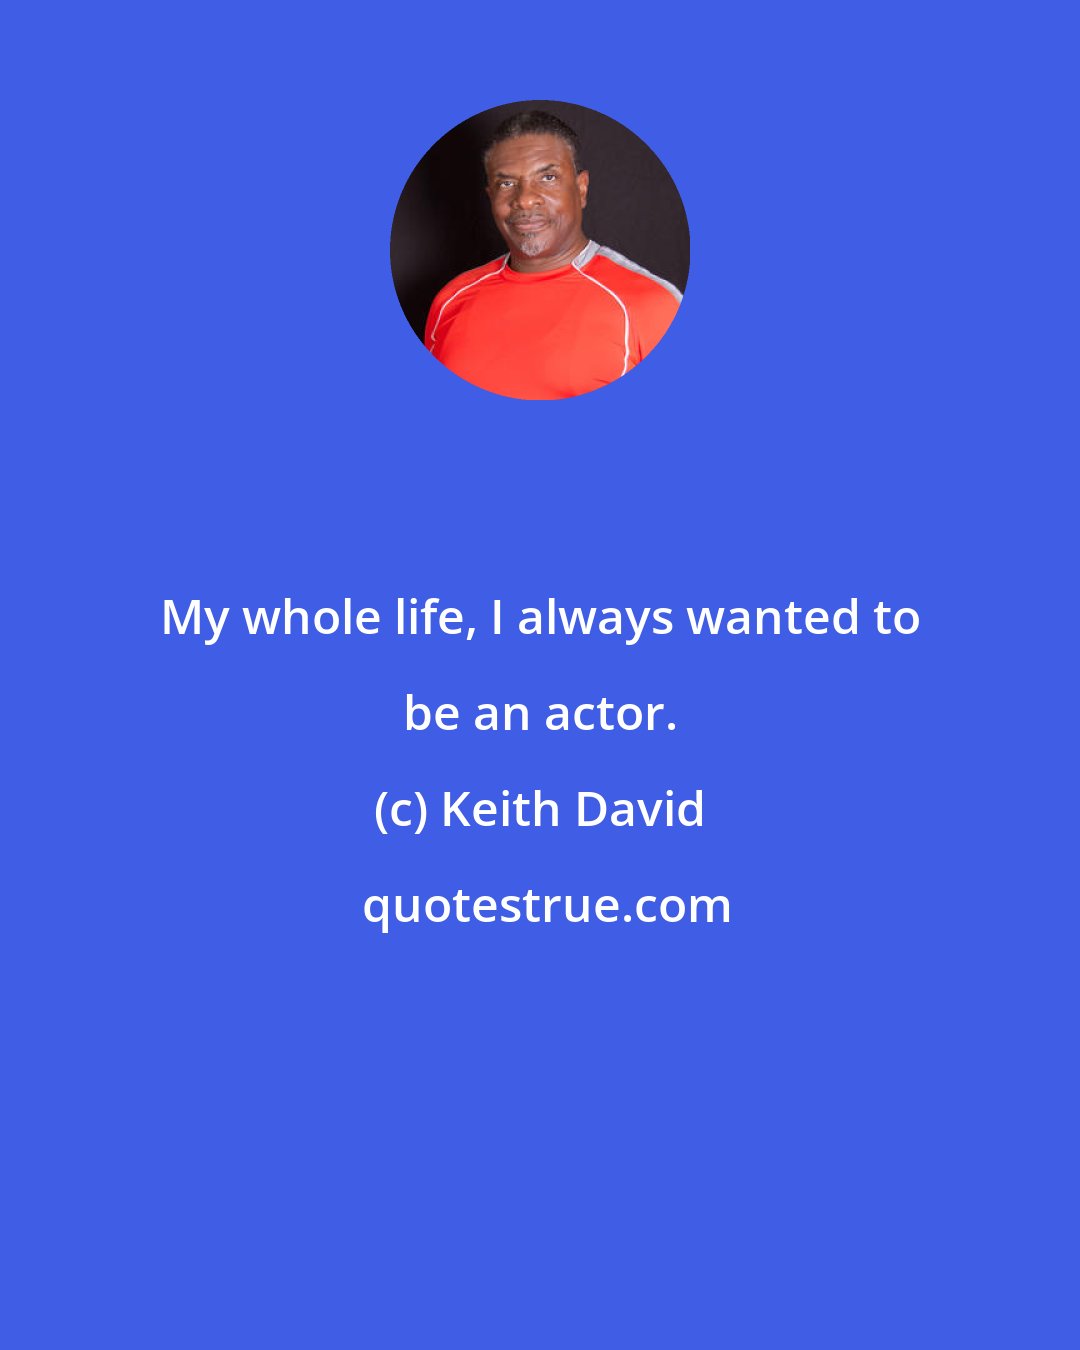 Keith David: My whole life, I always wanted to be an actor.